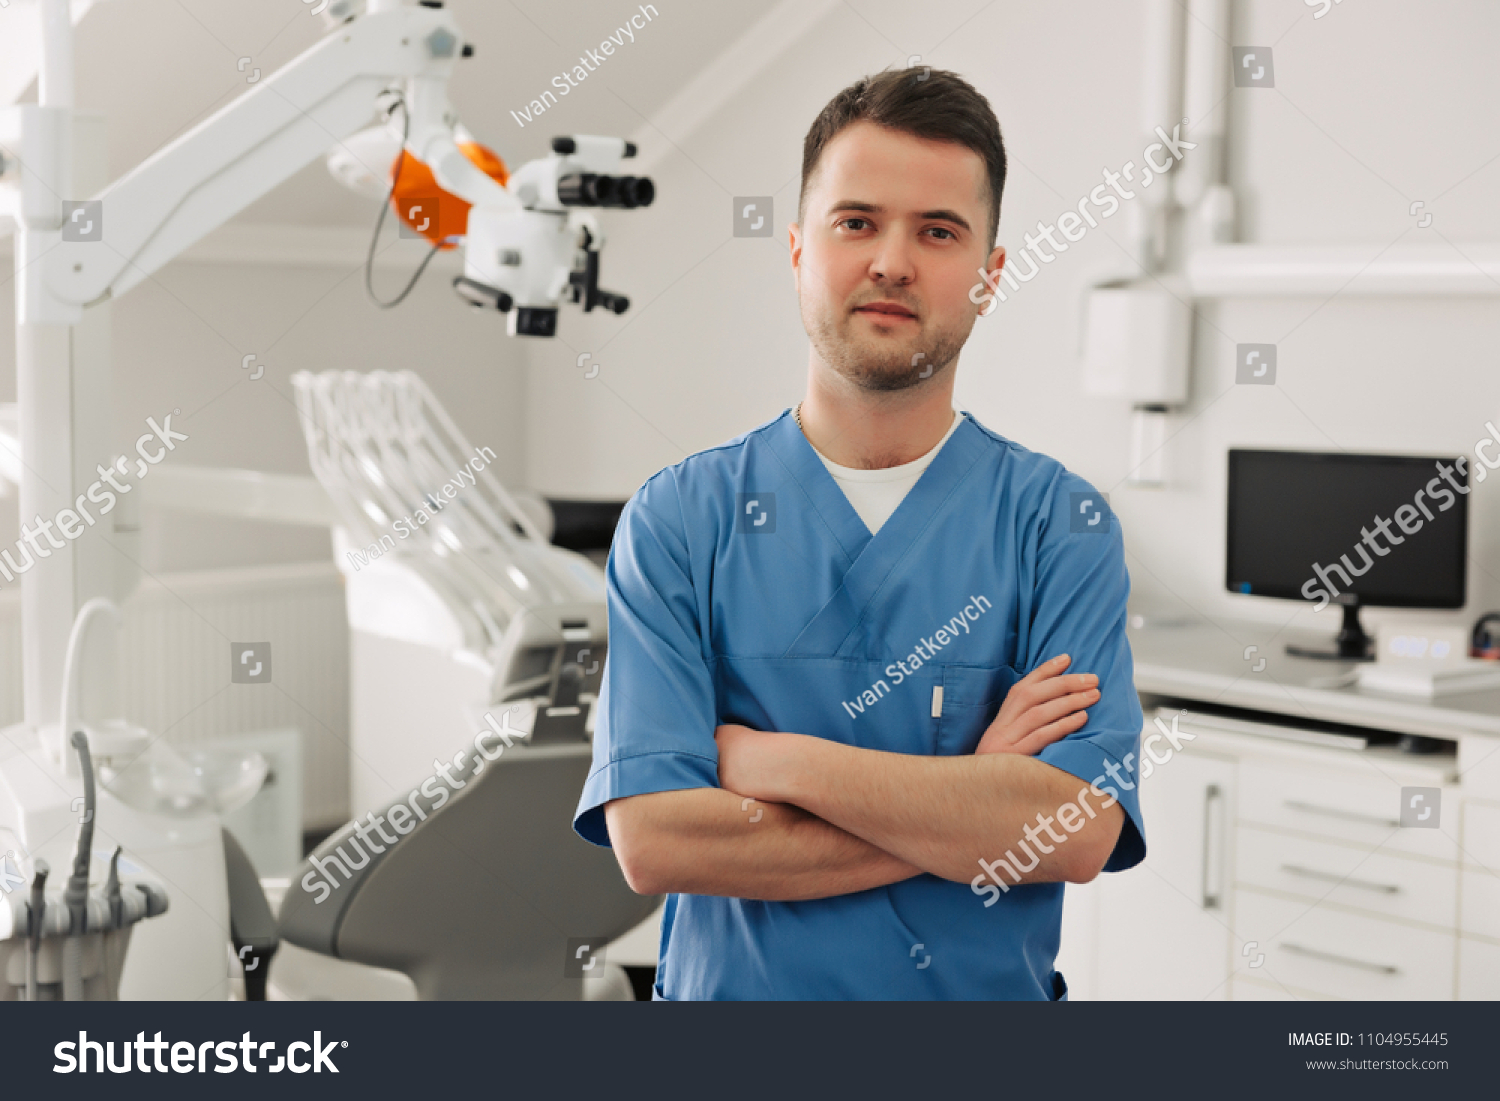 people, medicine, stomatology and healthcare concept - happy young male dentist with tools over medical office background #1104955445